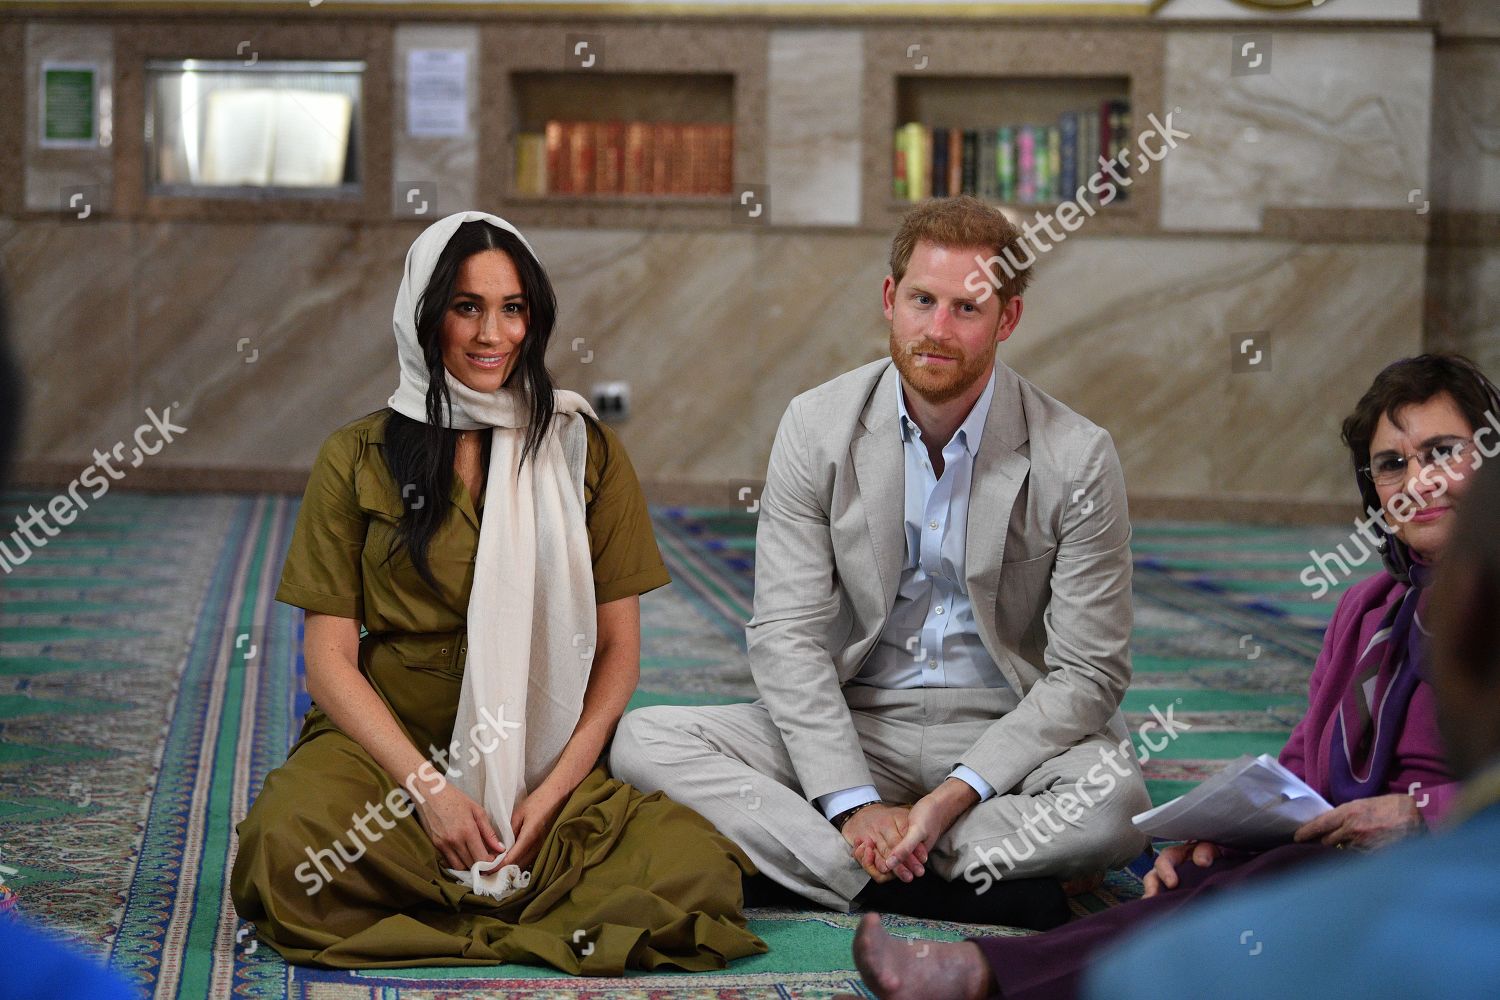 prince-harry-and-meghan-duchess-of-sussex-visit-to-africa-shutterstock-editorial-10422332bz.jpg